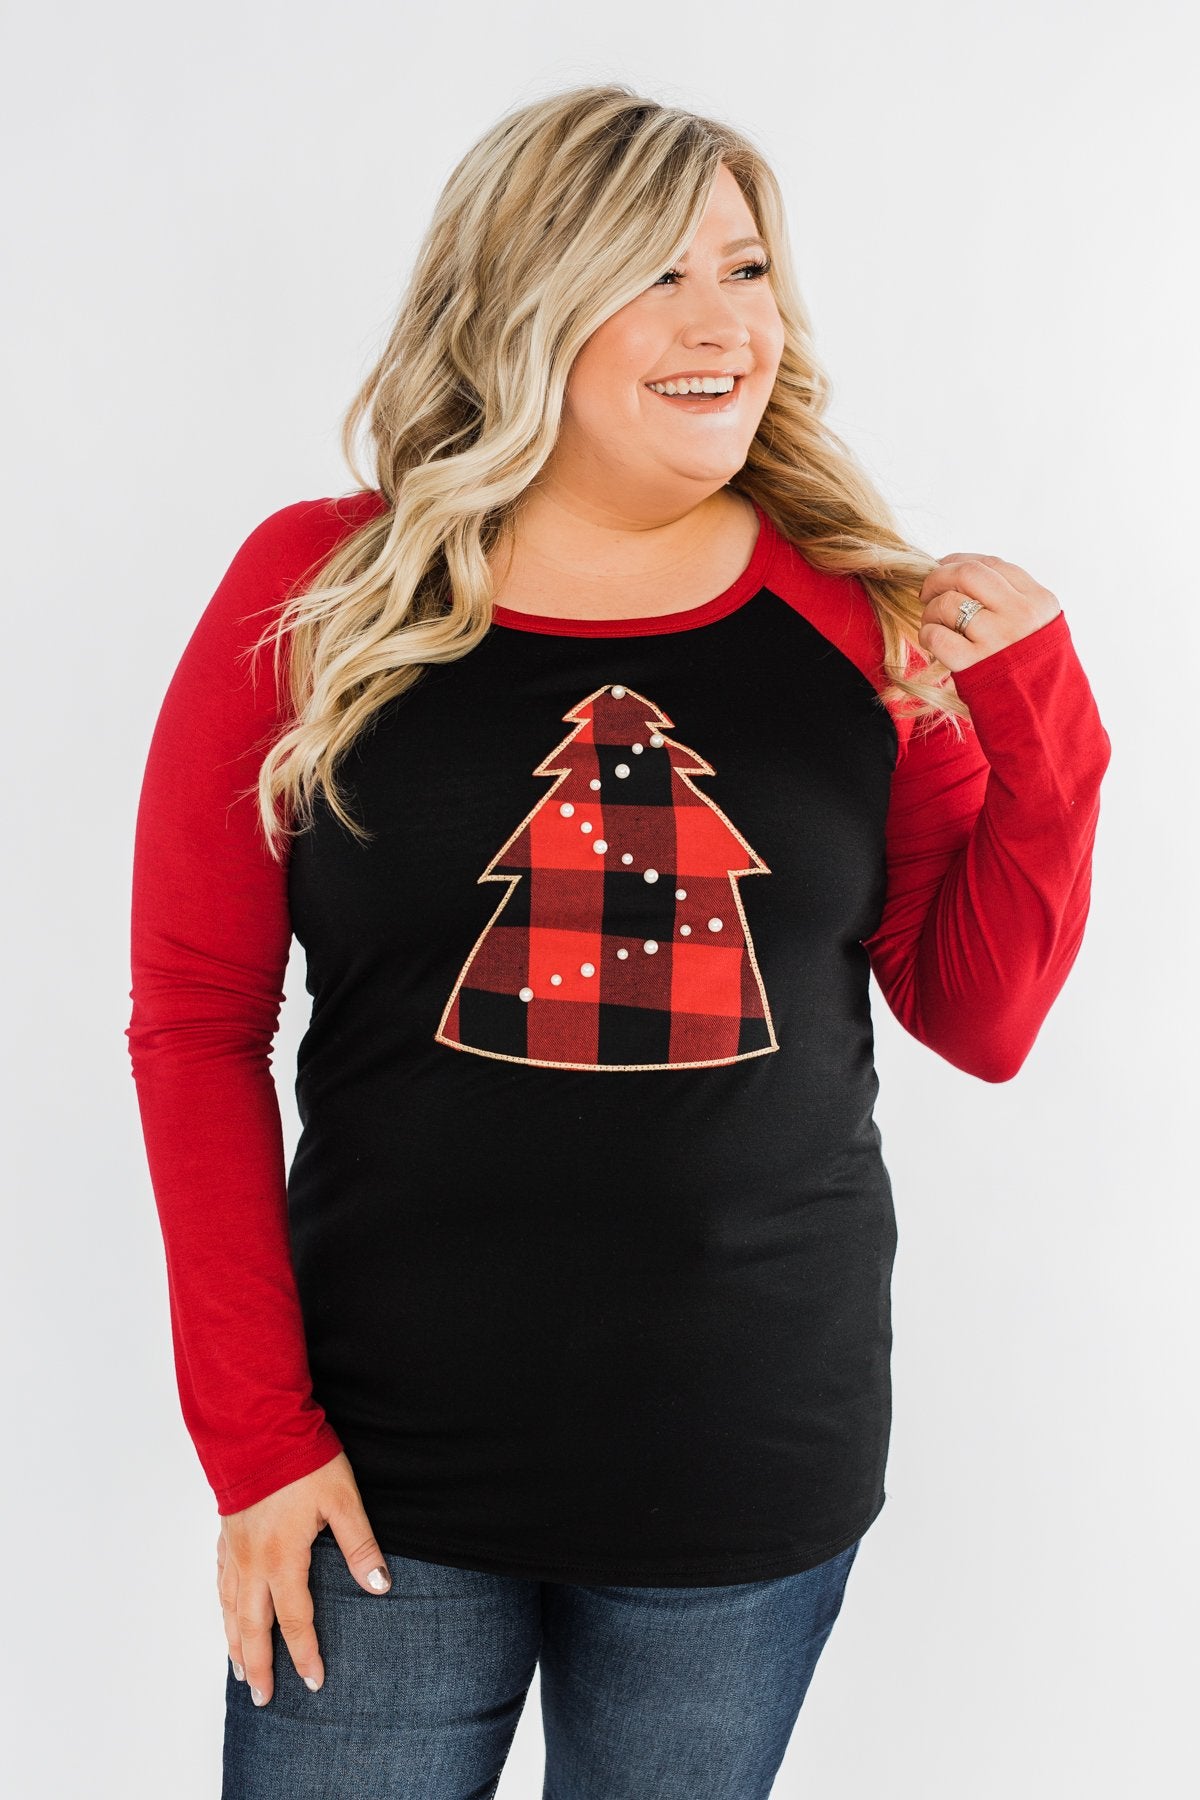 Around The Christmas Tree Graphic Top- Black & Holiday Red